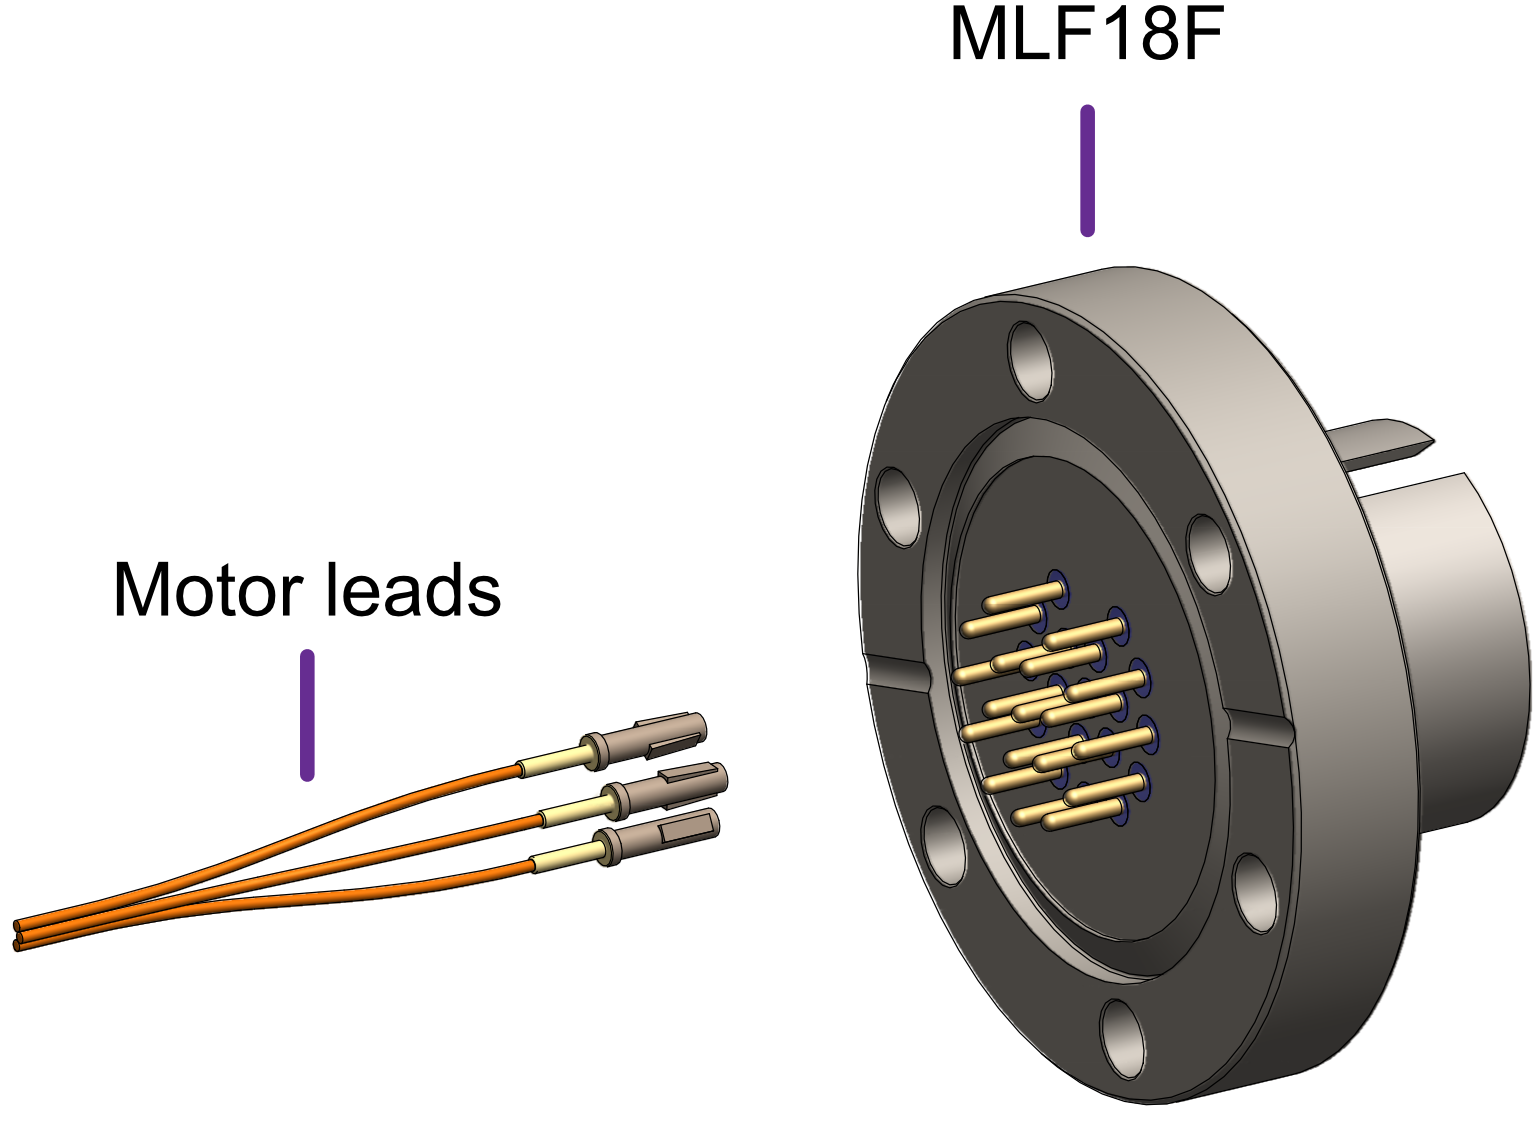 vacuum side motor connection straight into mlf18f 3.png